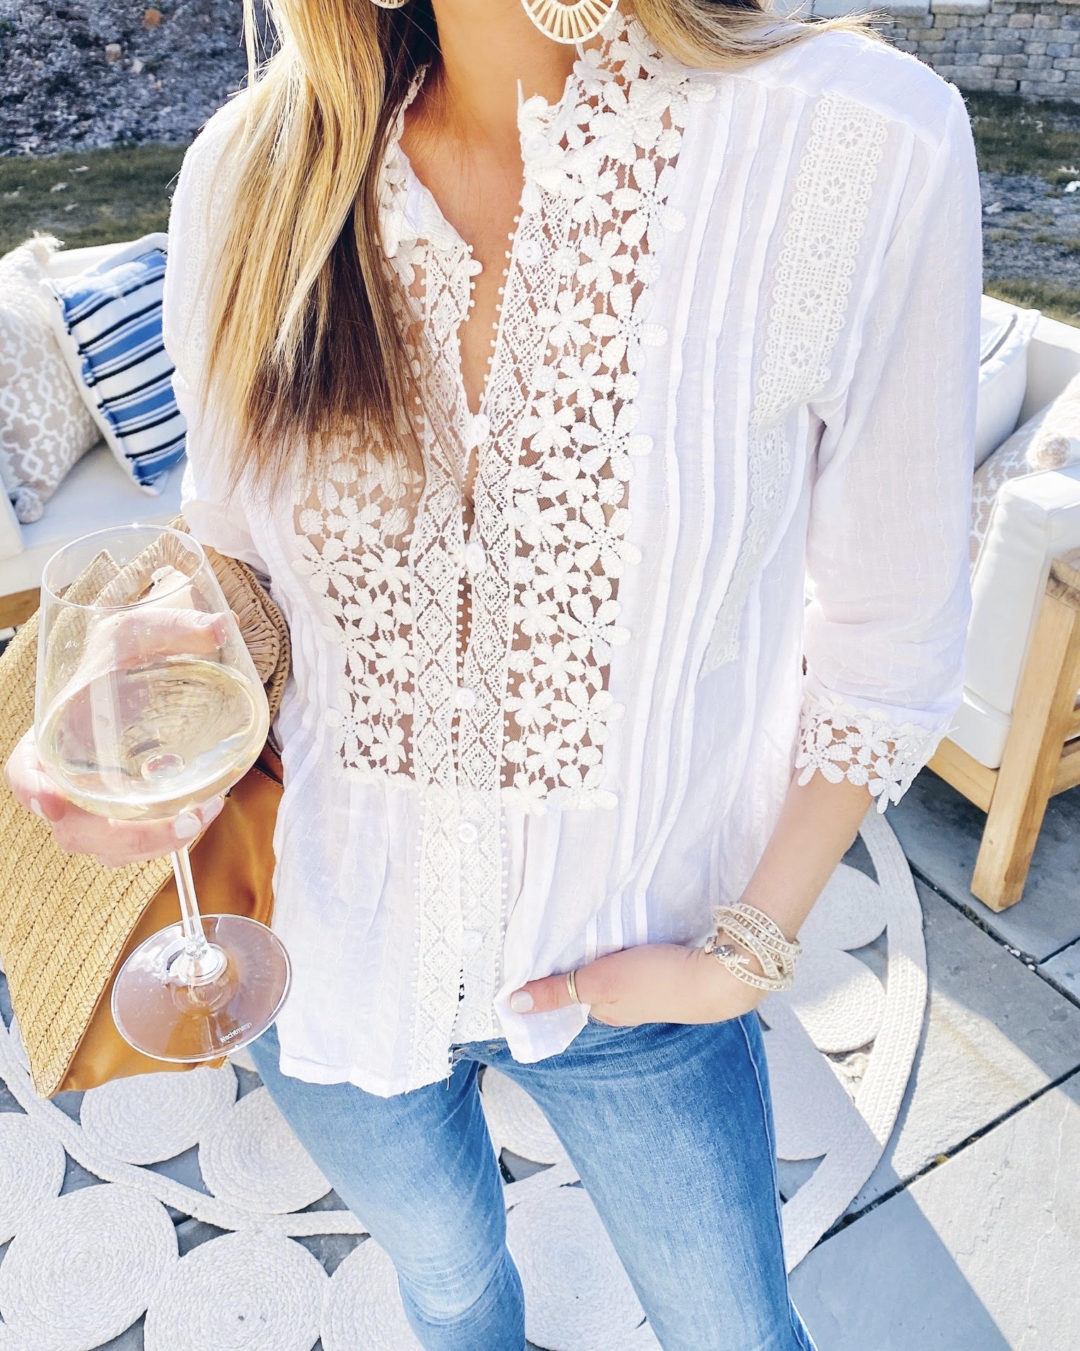 White lace floral crochet top from amazon with express button fly jeans and Victoria Emerson wrap bracelet